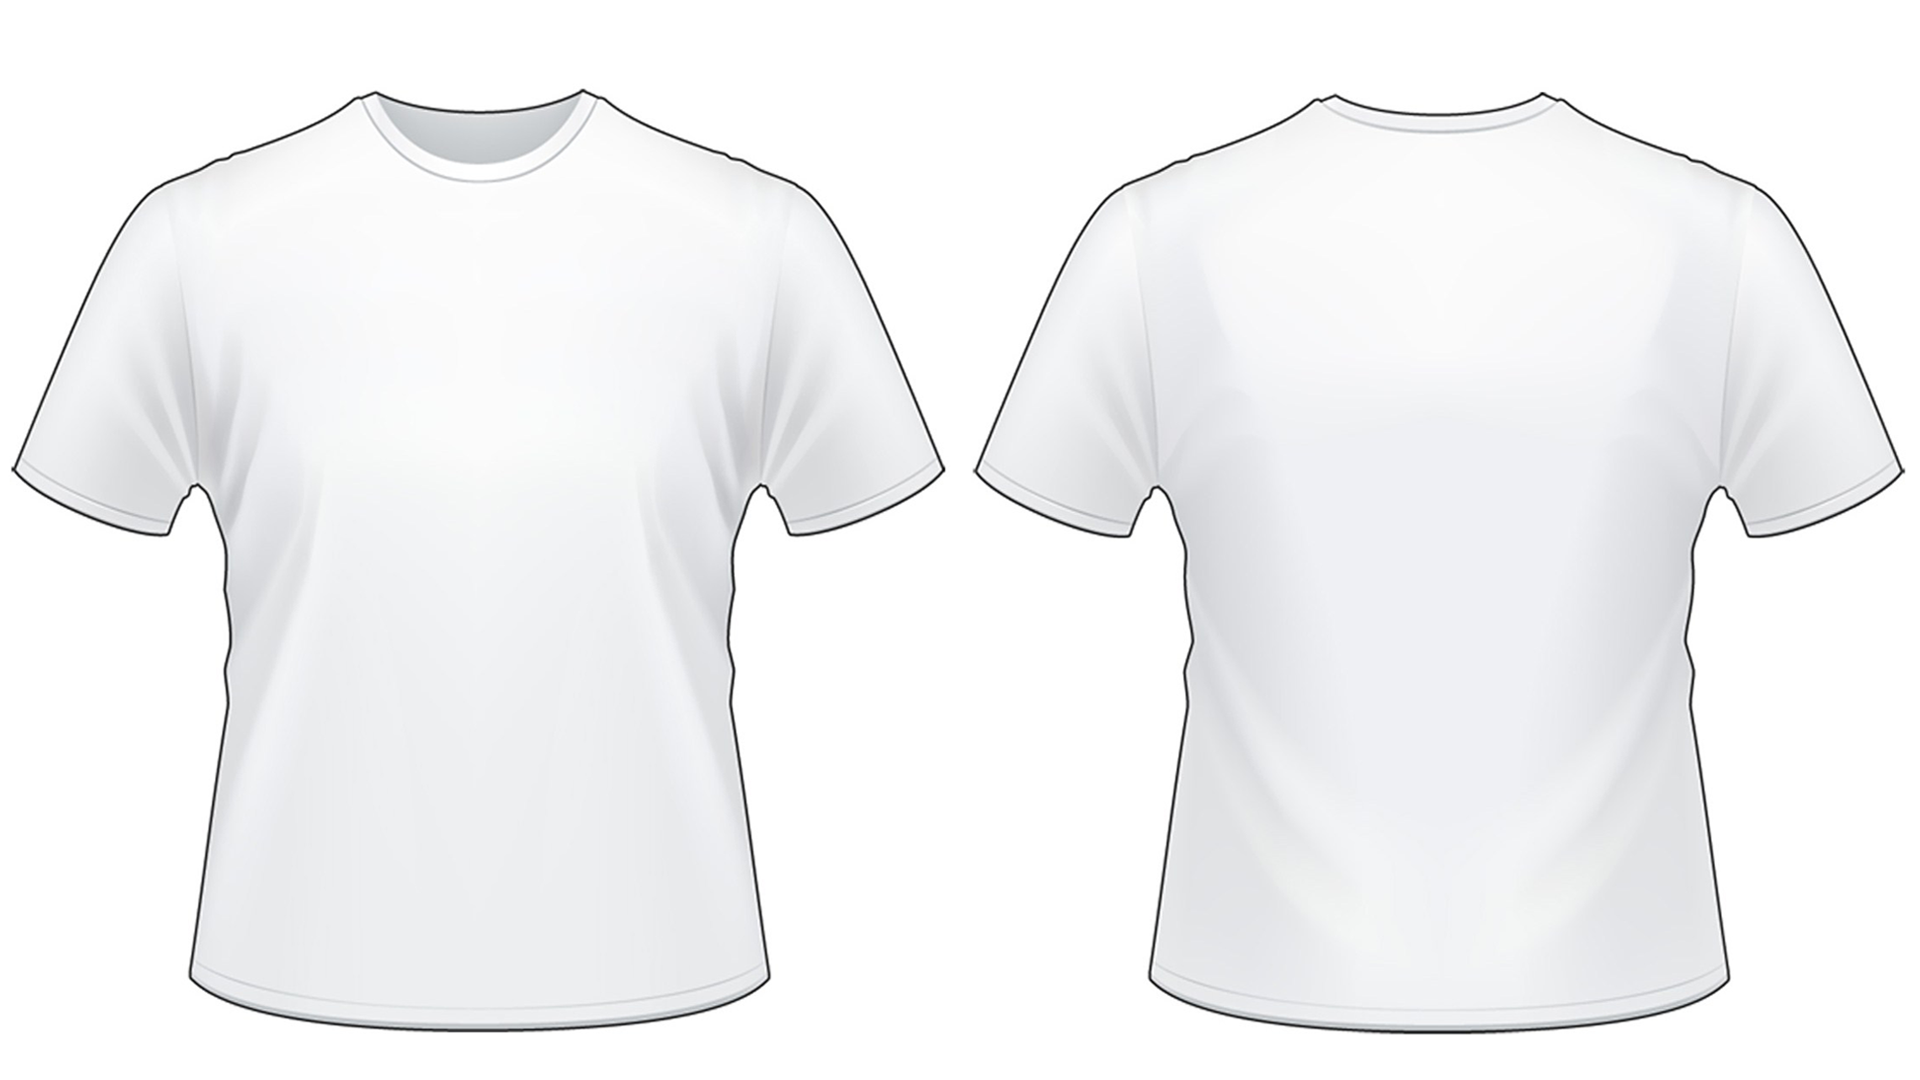 Blank Tshirt Template Worksheet In Png Hd Wallpapers Wallpapers Download High Resolution Wallpapers Shirt Template T Shirt Png T Shirt Design Template